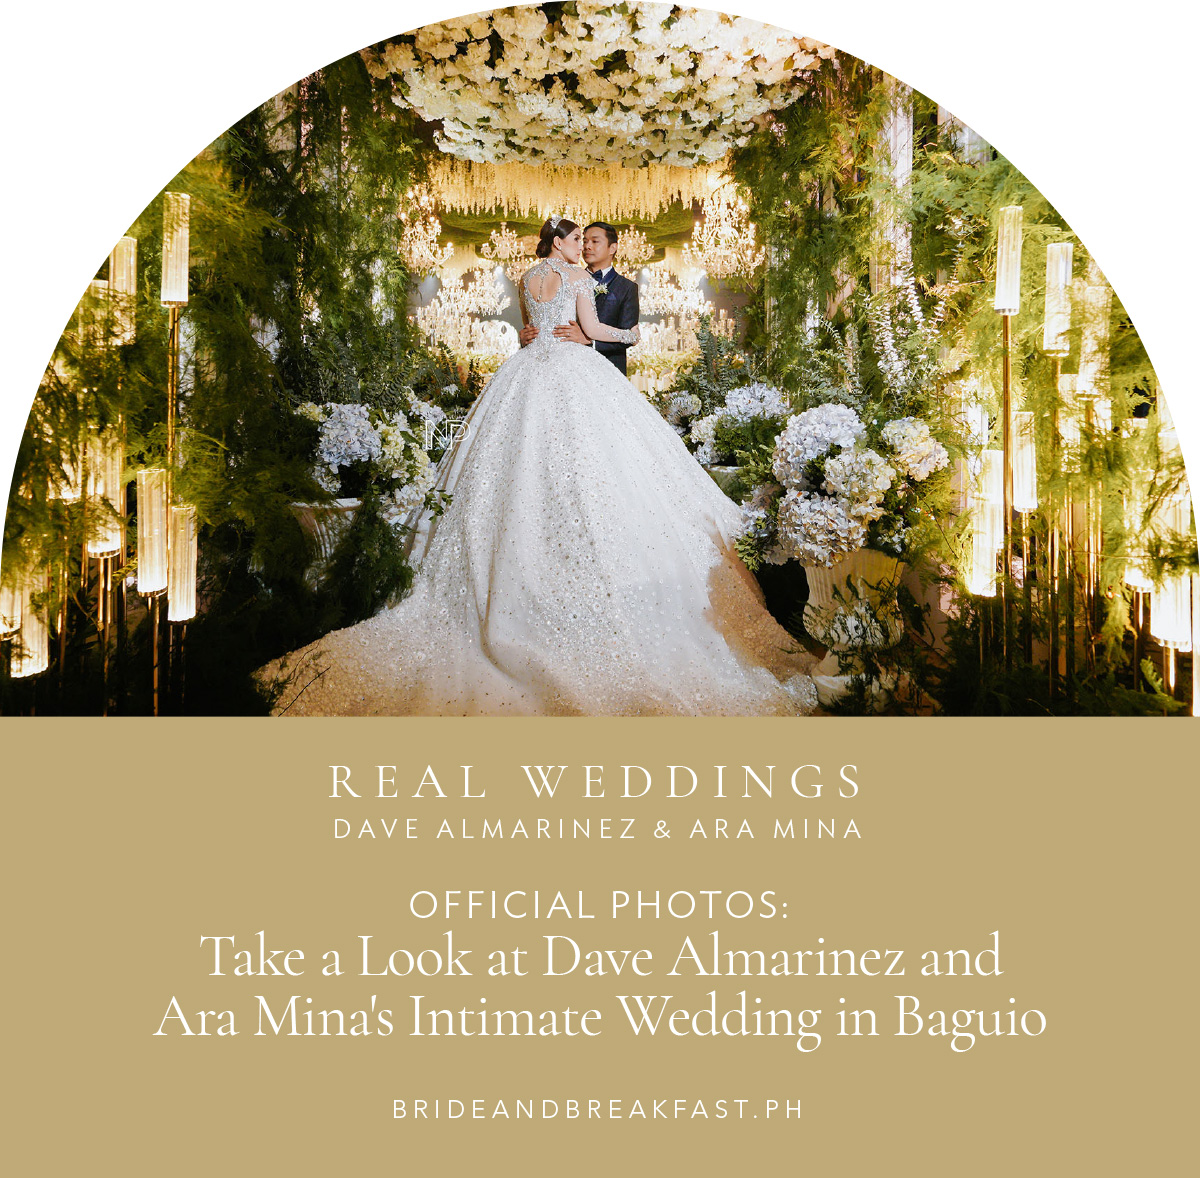 Official Photos: Take a Look at Dave Almarinez and Ara Mina's Intimate Wedding in Baguio